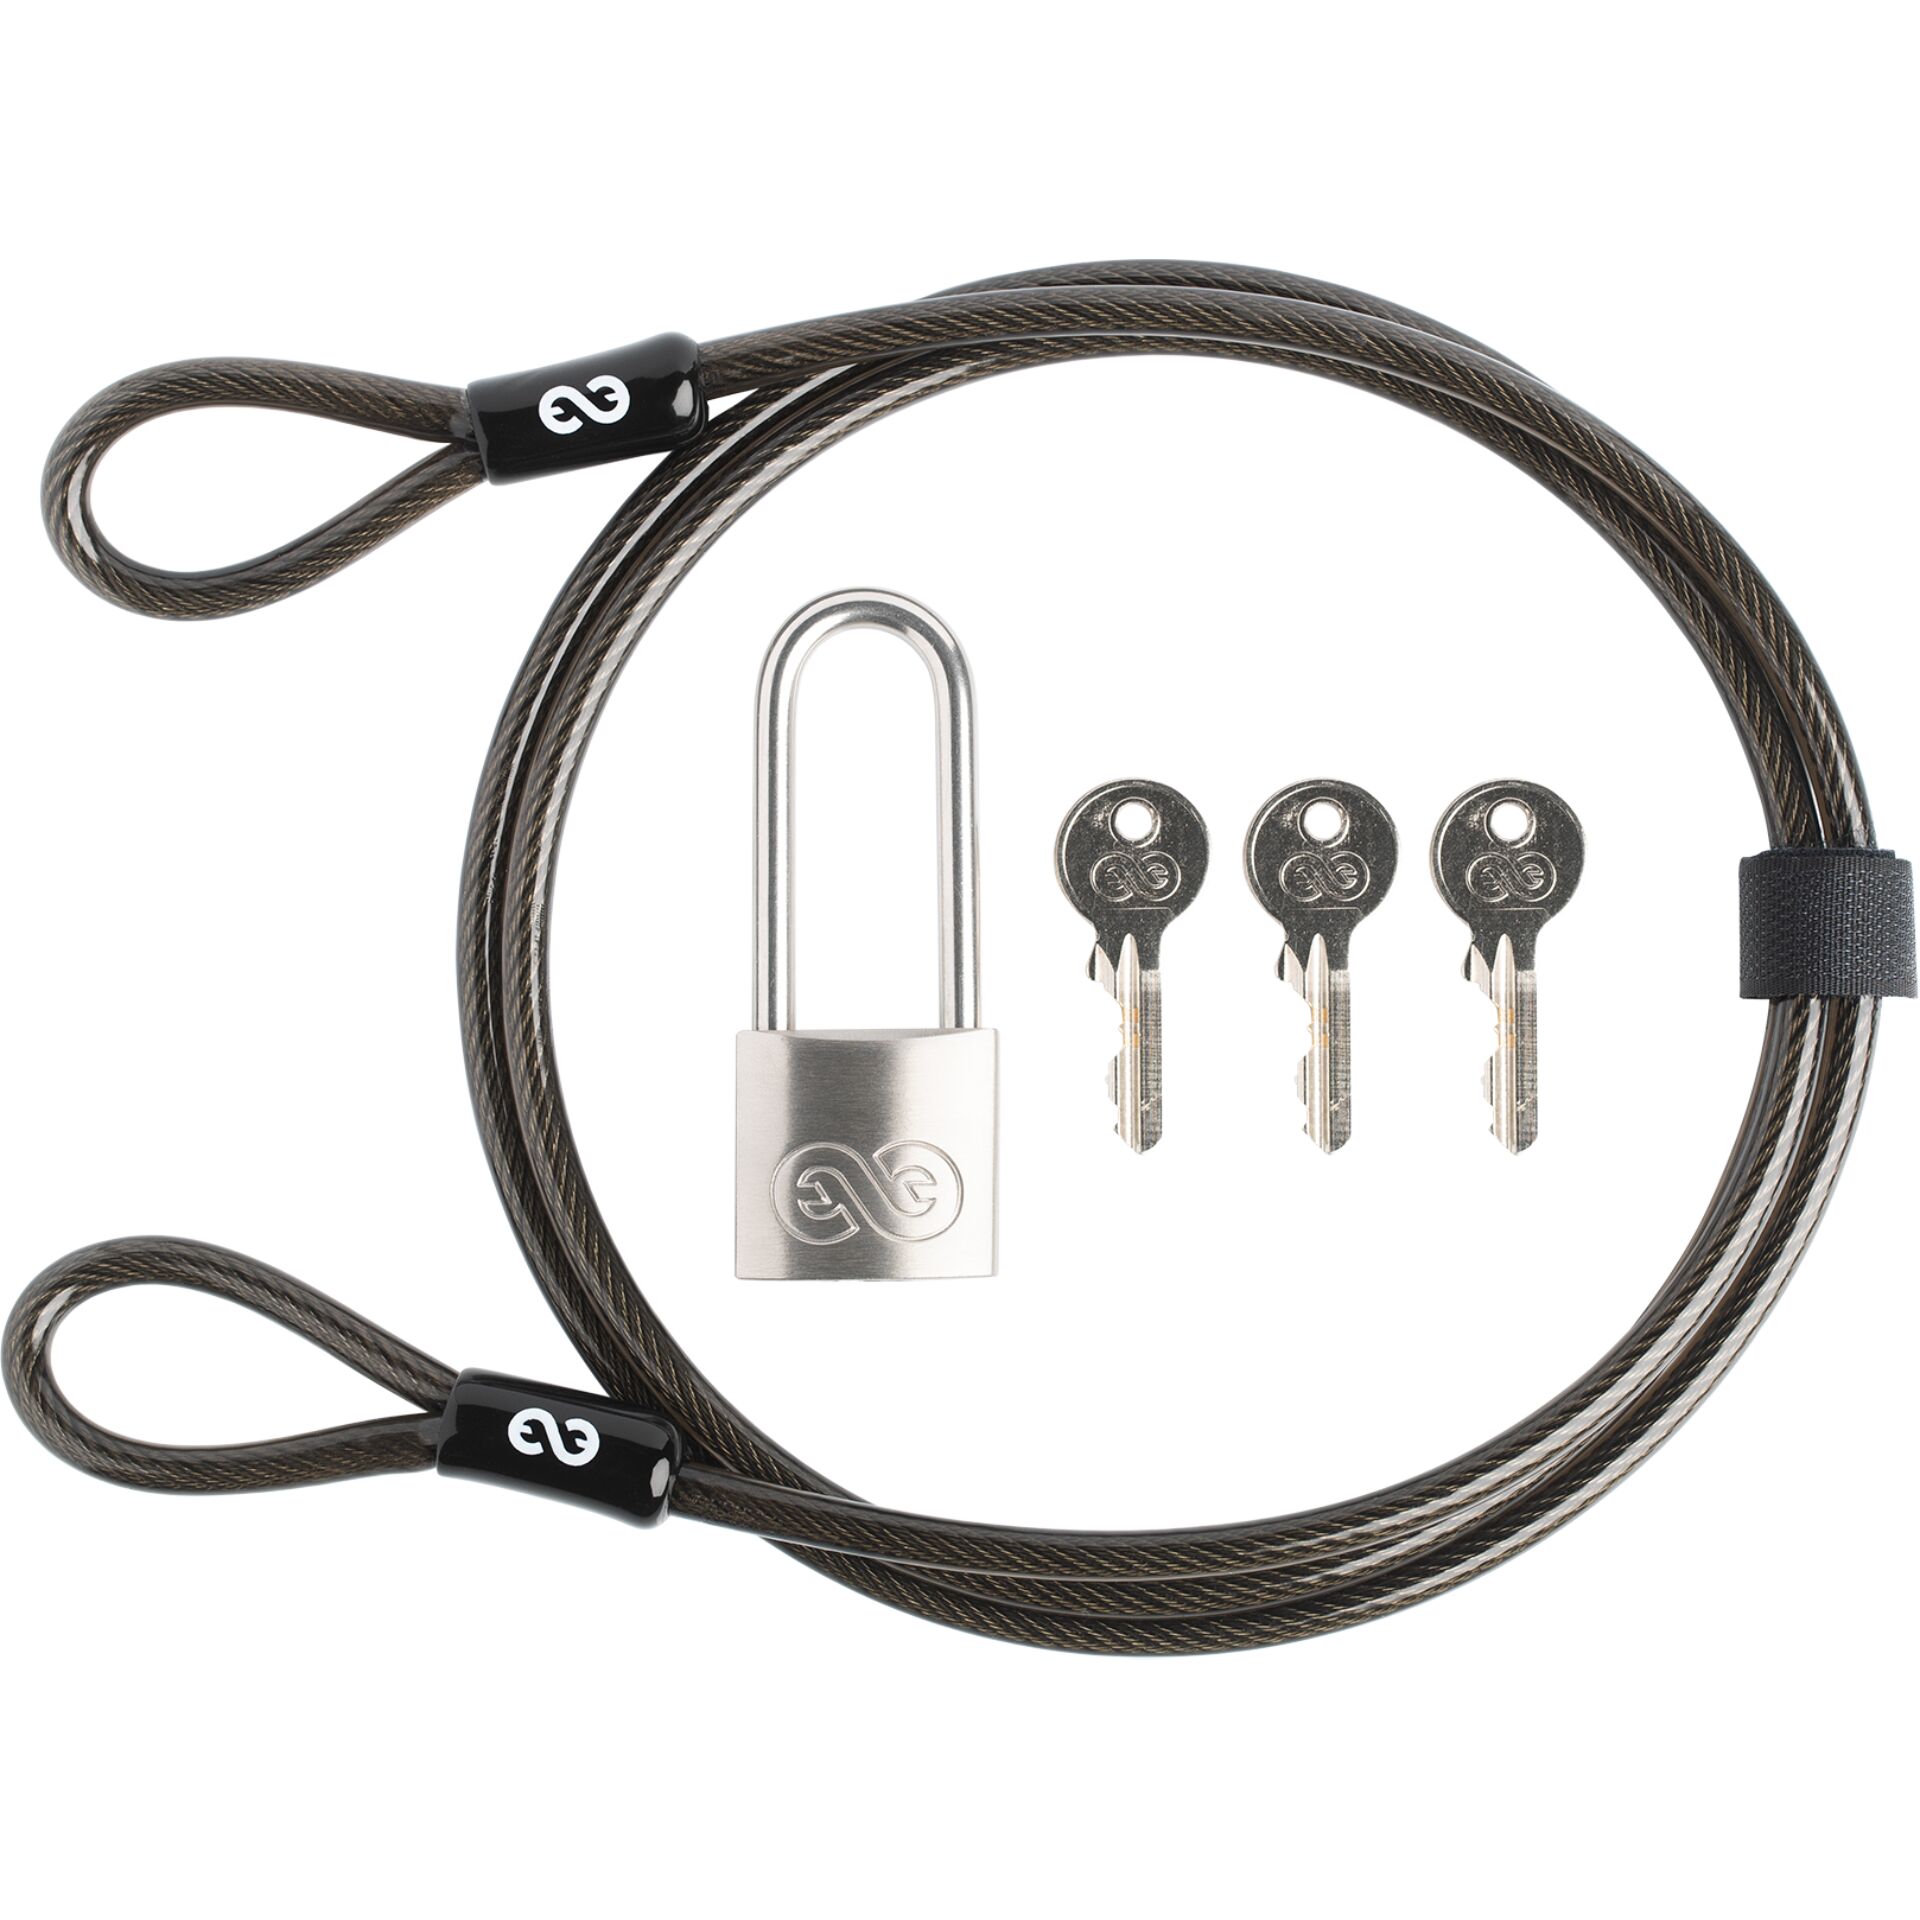 Enlaps Tikee 3 Pro+ Security cable lock